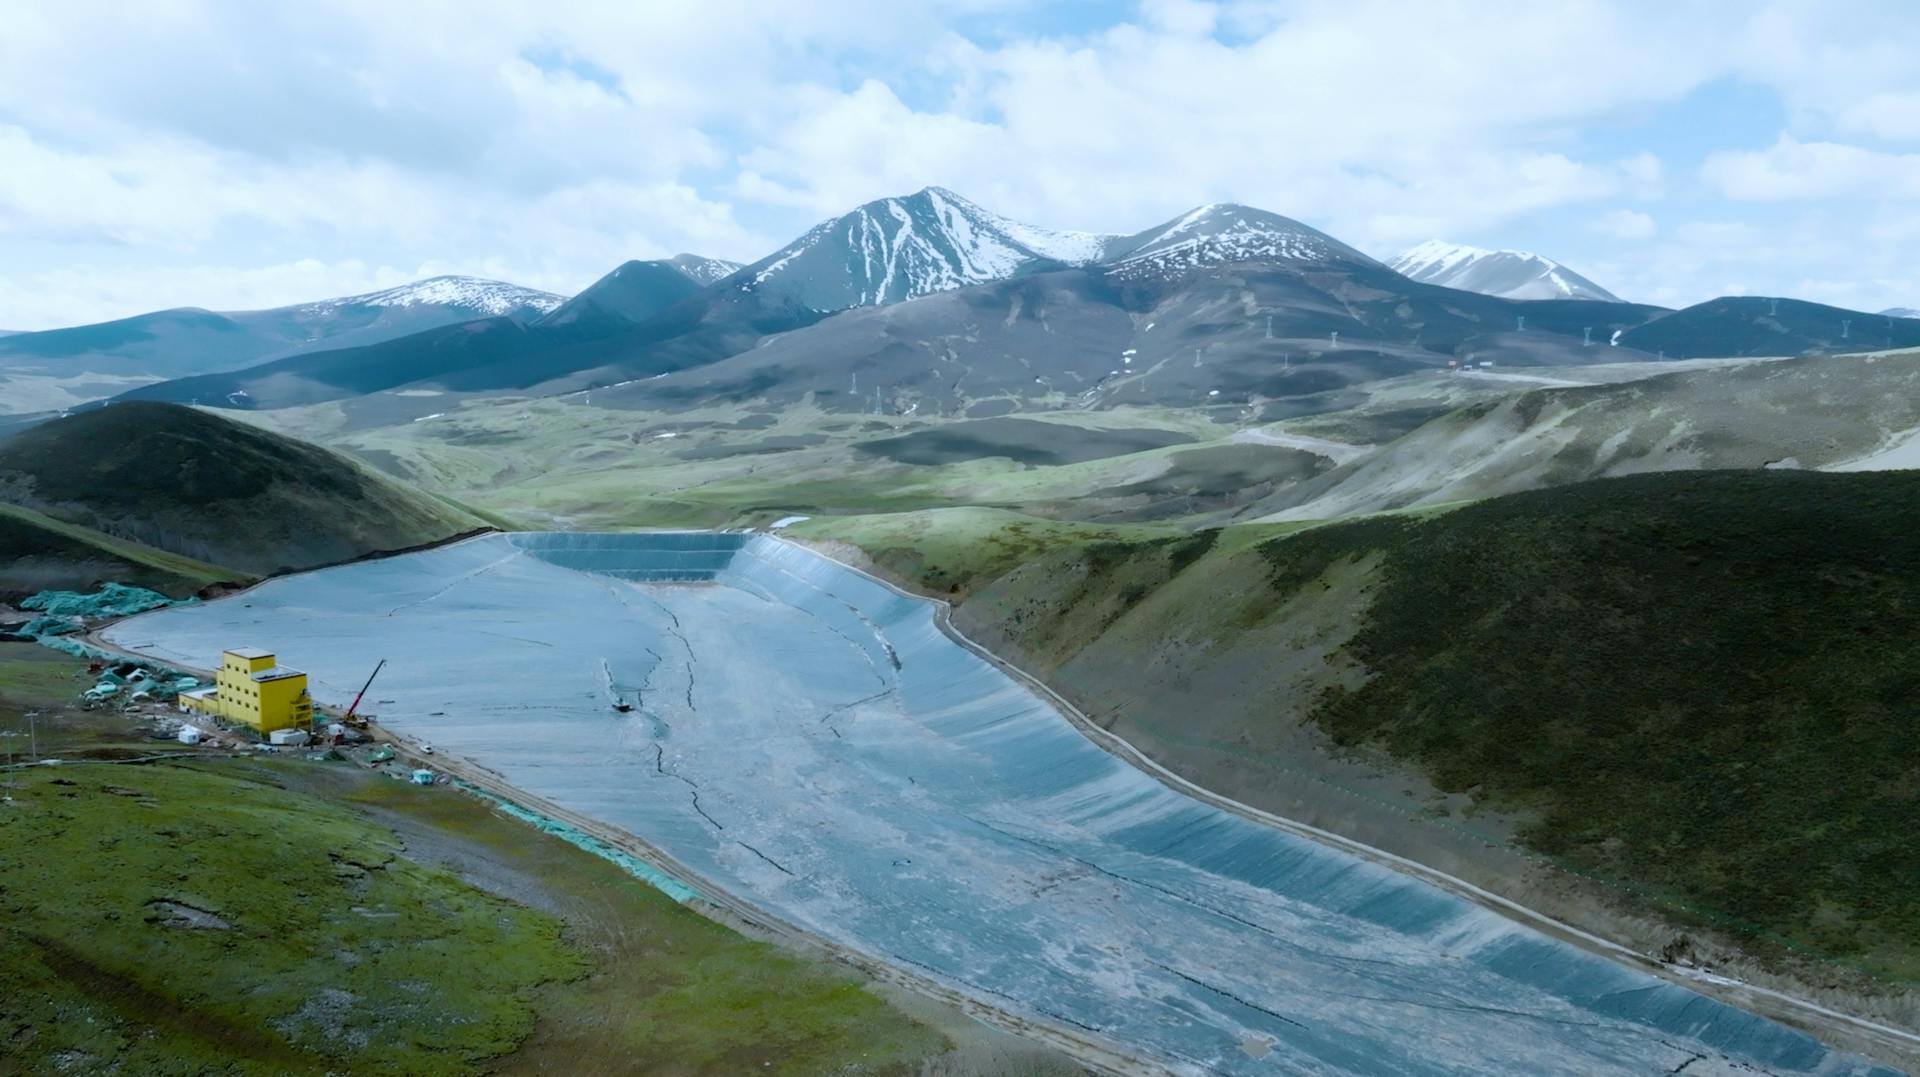 Solmax geomembranes were used to line the tailings facilities of the recently expanded Yulong Copper Mine. The mine located in the Qinghai-Tibet Plateau, on one of the largest copper deposits in China, is important to the economy of the region.